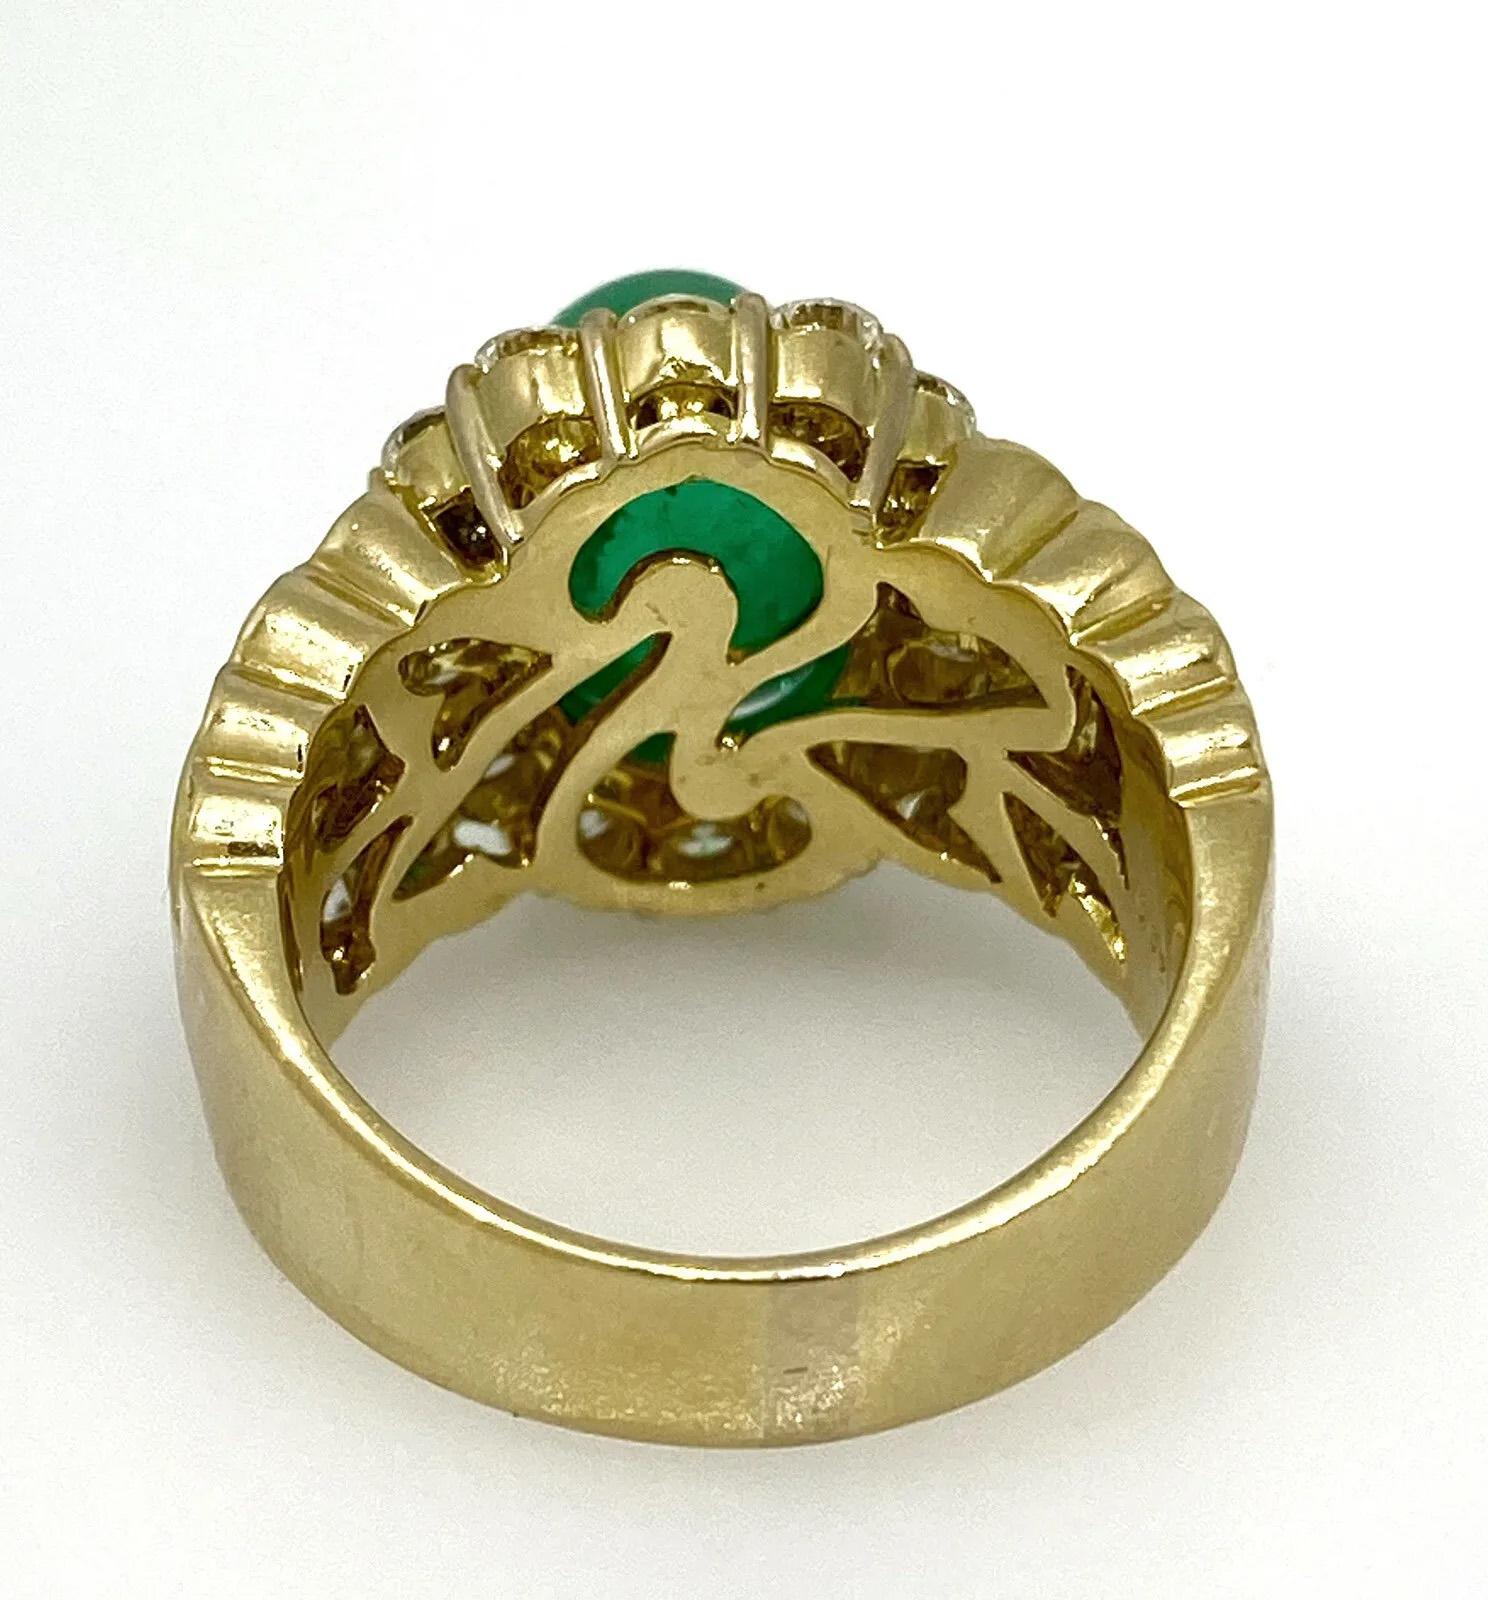 5.12 Carat Emerald Cabochon & Diamond Cocktail Ring in 18k Yellow Gold  In Excellent Condition For Sale In La Jolla, CA